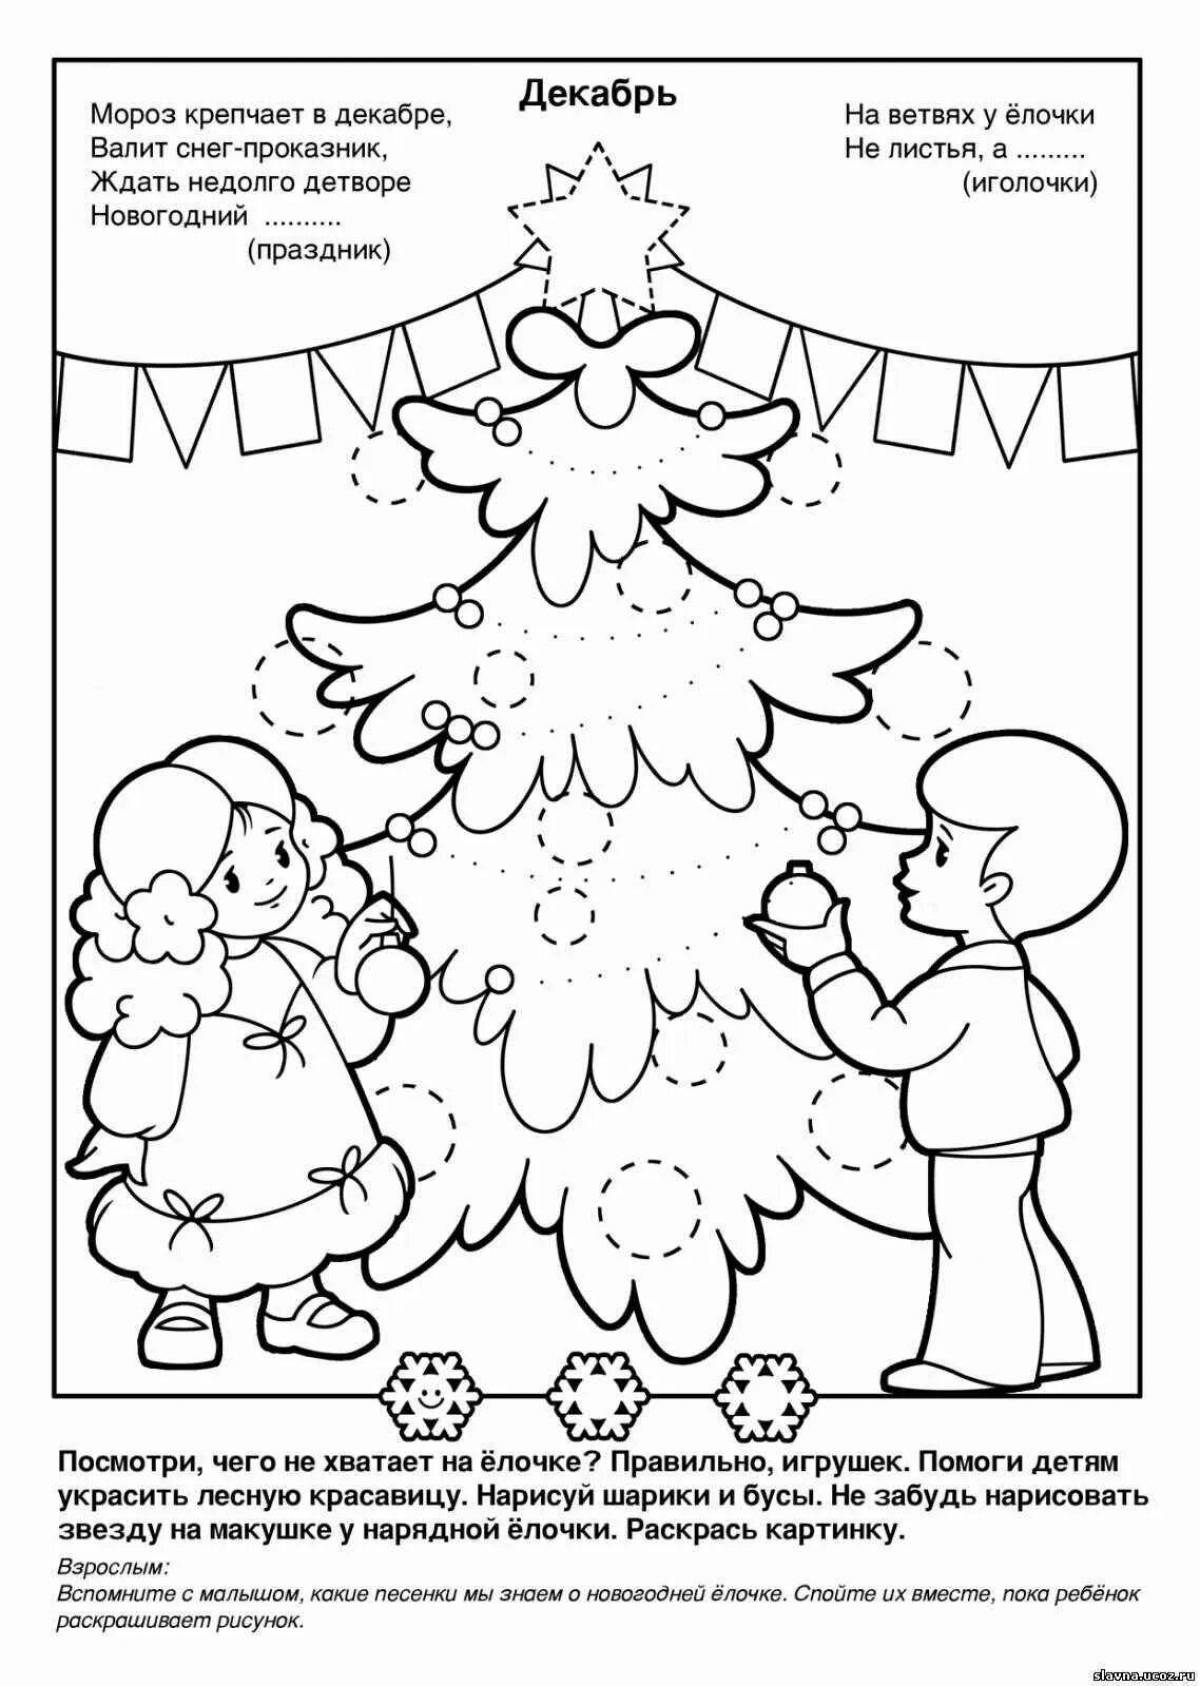 Great December coloring book for kids